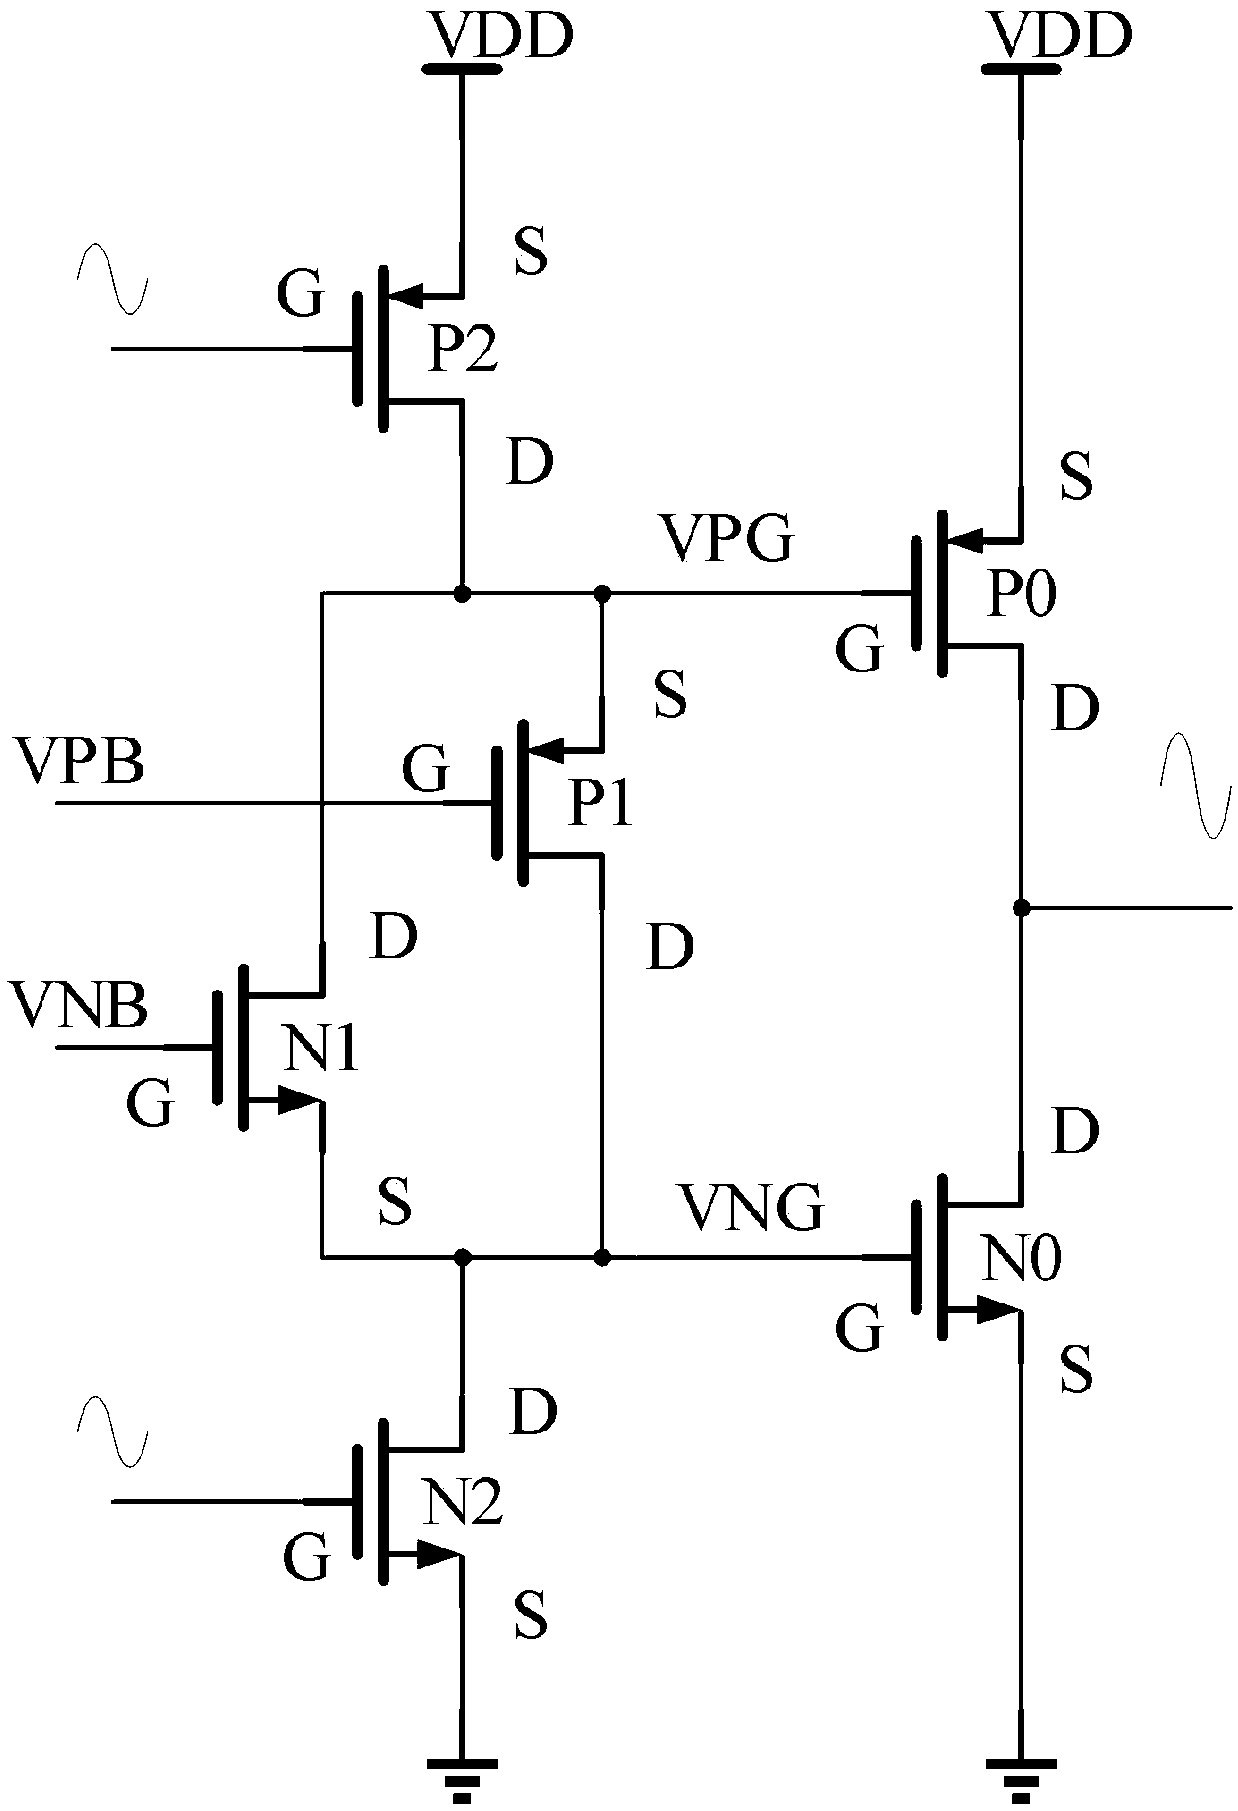 Class AB amplifier for sampling and controlling background noise based on operational amplifiers